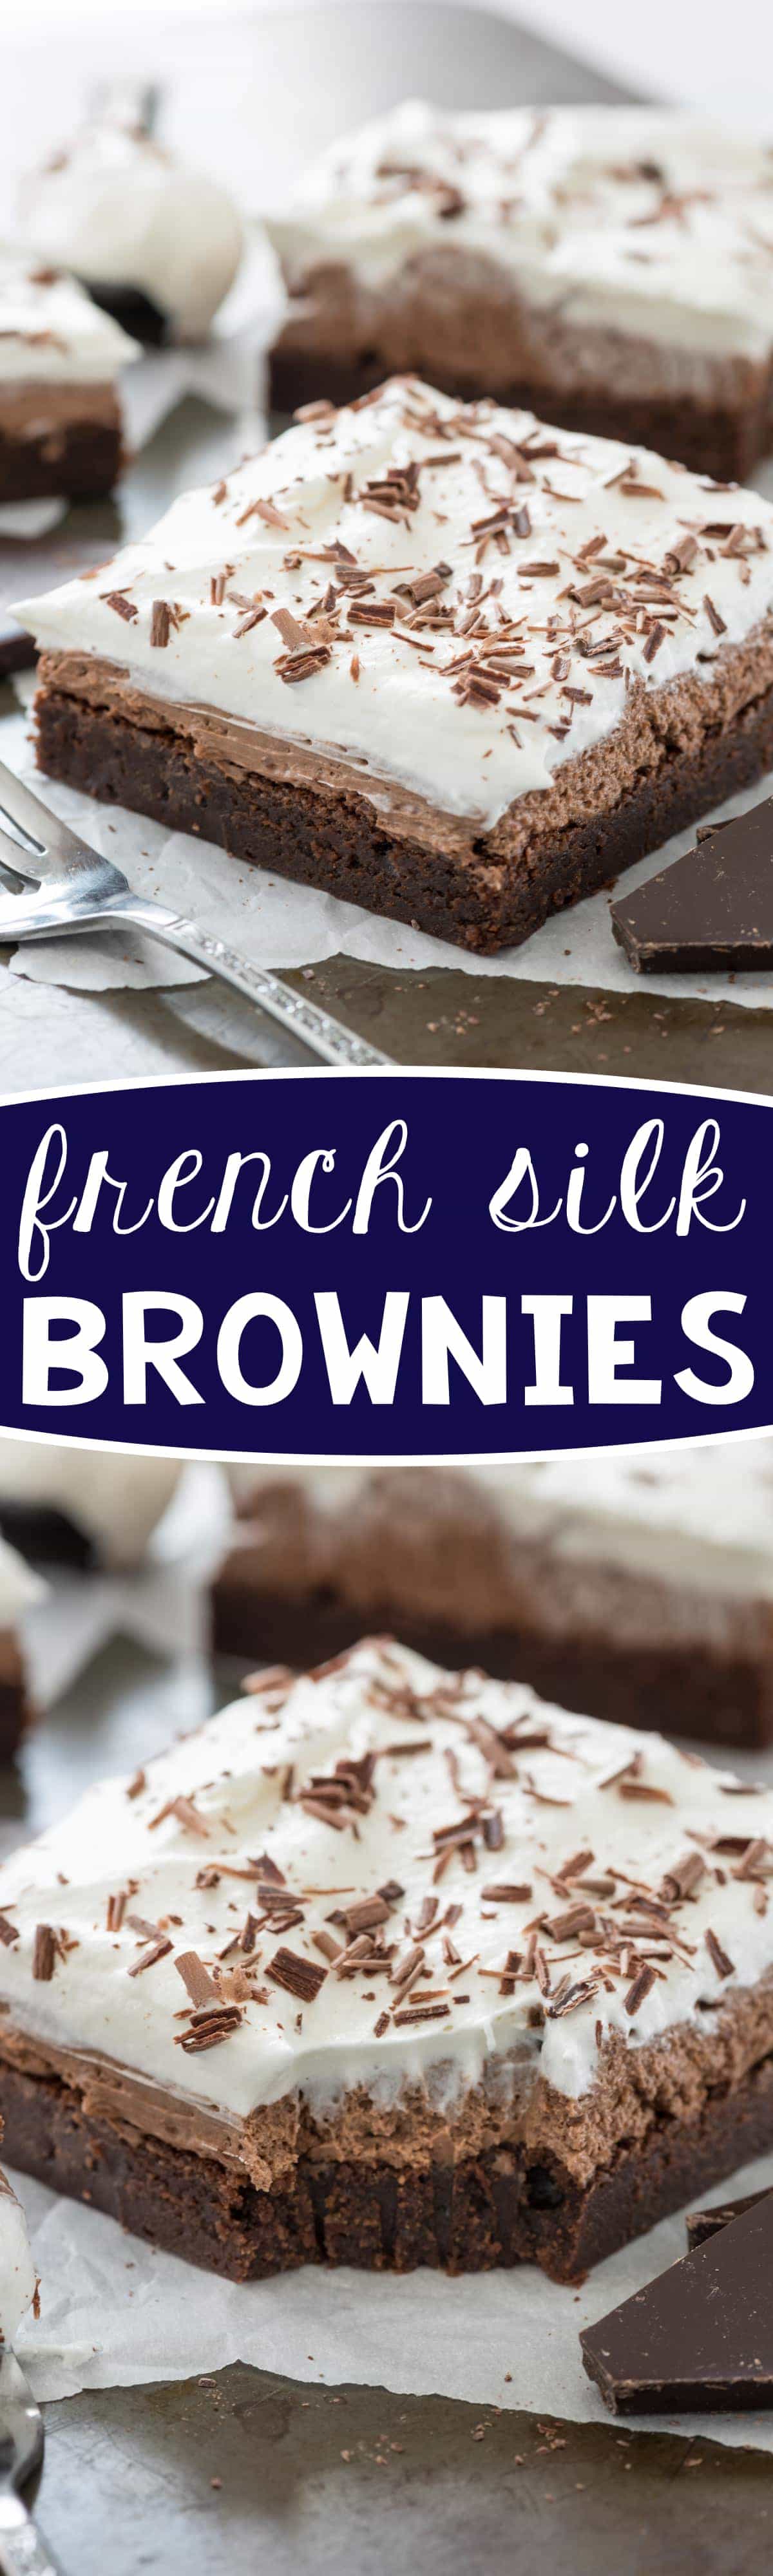 French Silk Brownies Recipe - make this an easy recipe by using a box brownie mix! The french silk recipe is egg-free. Everyone loved this recipe - it's EPIC!